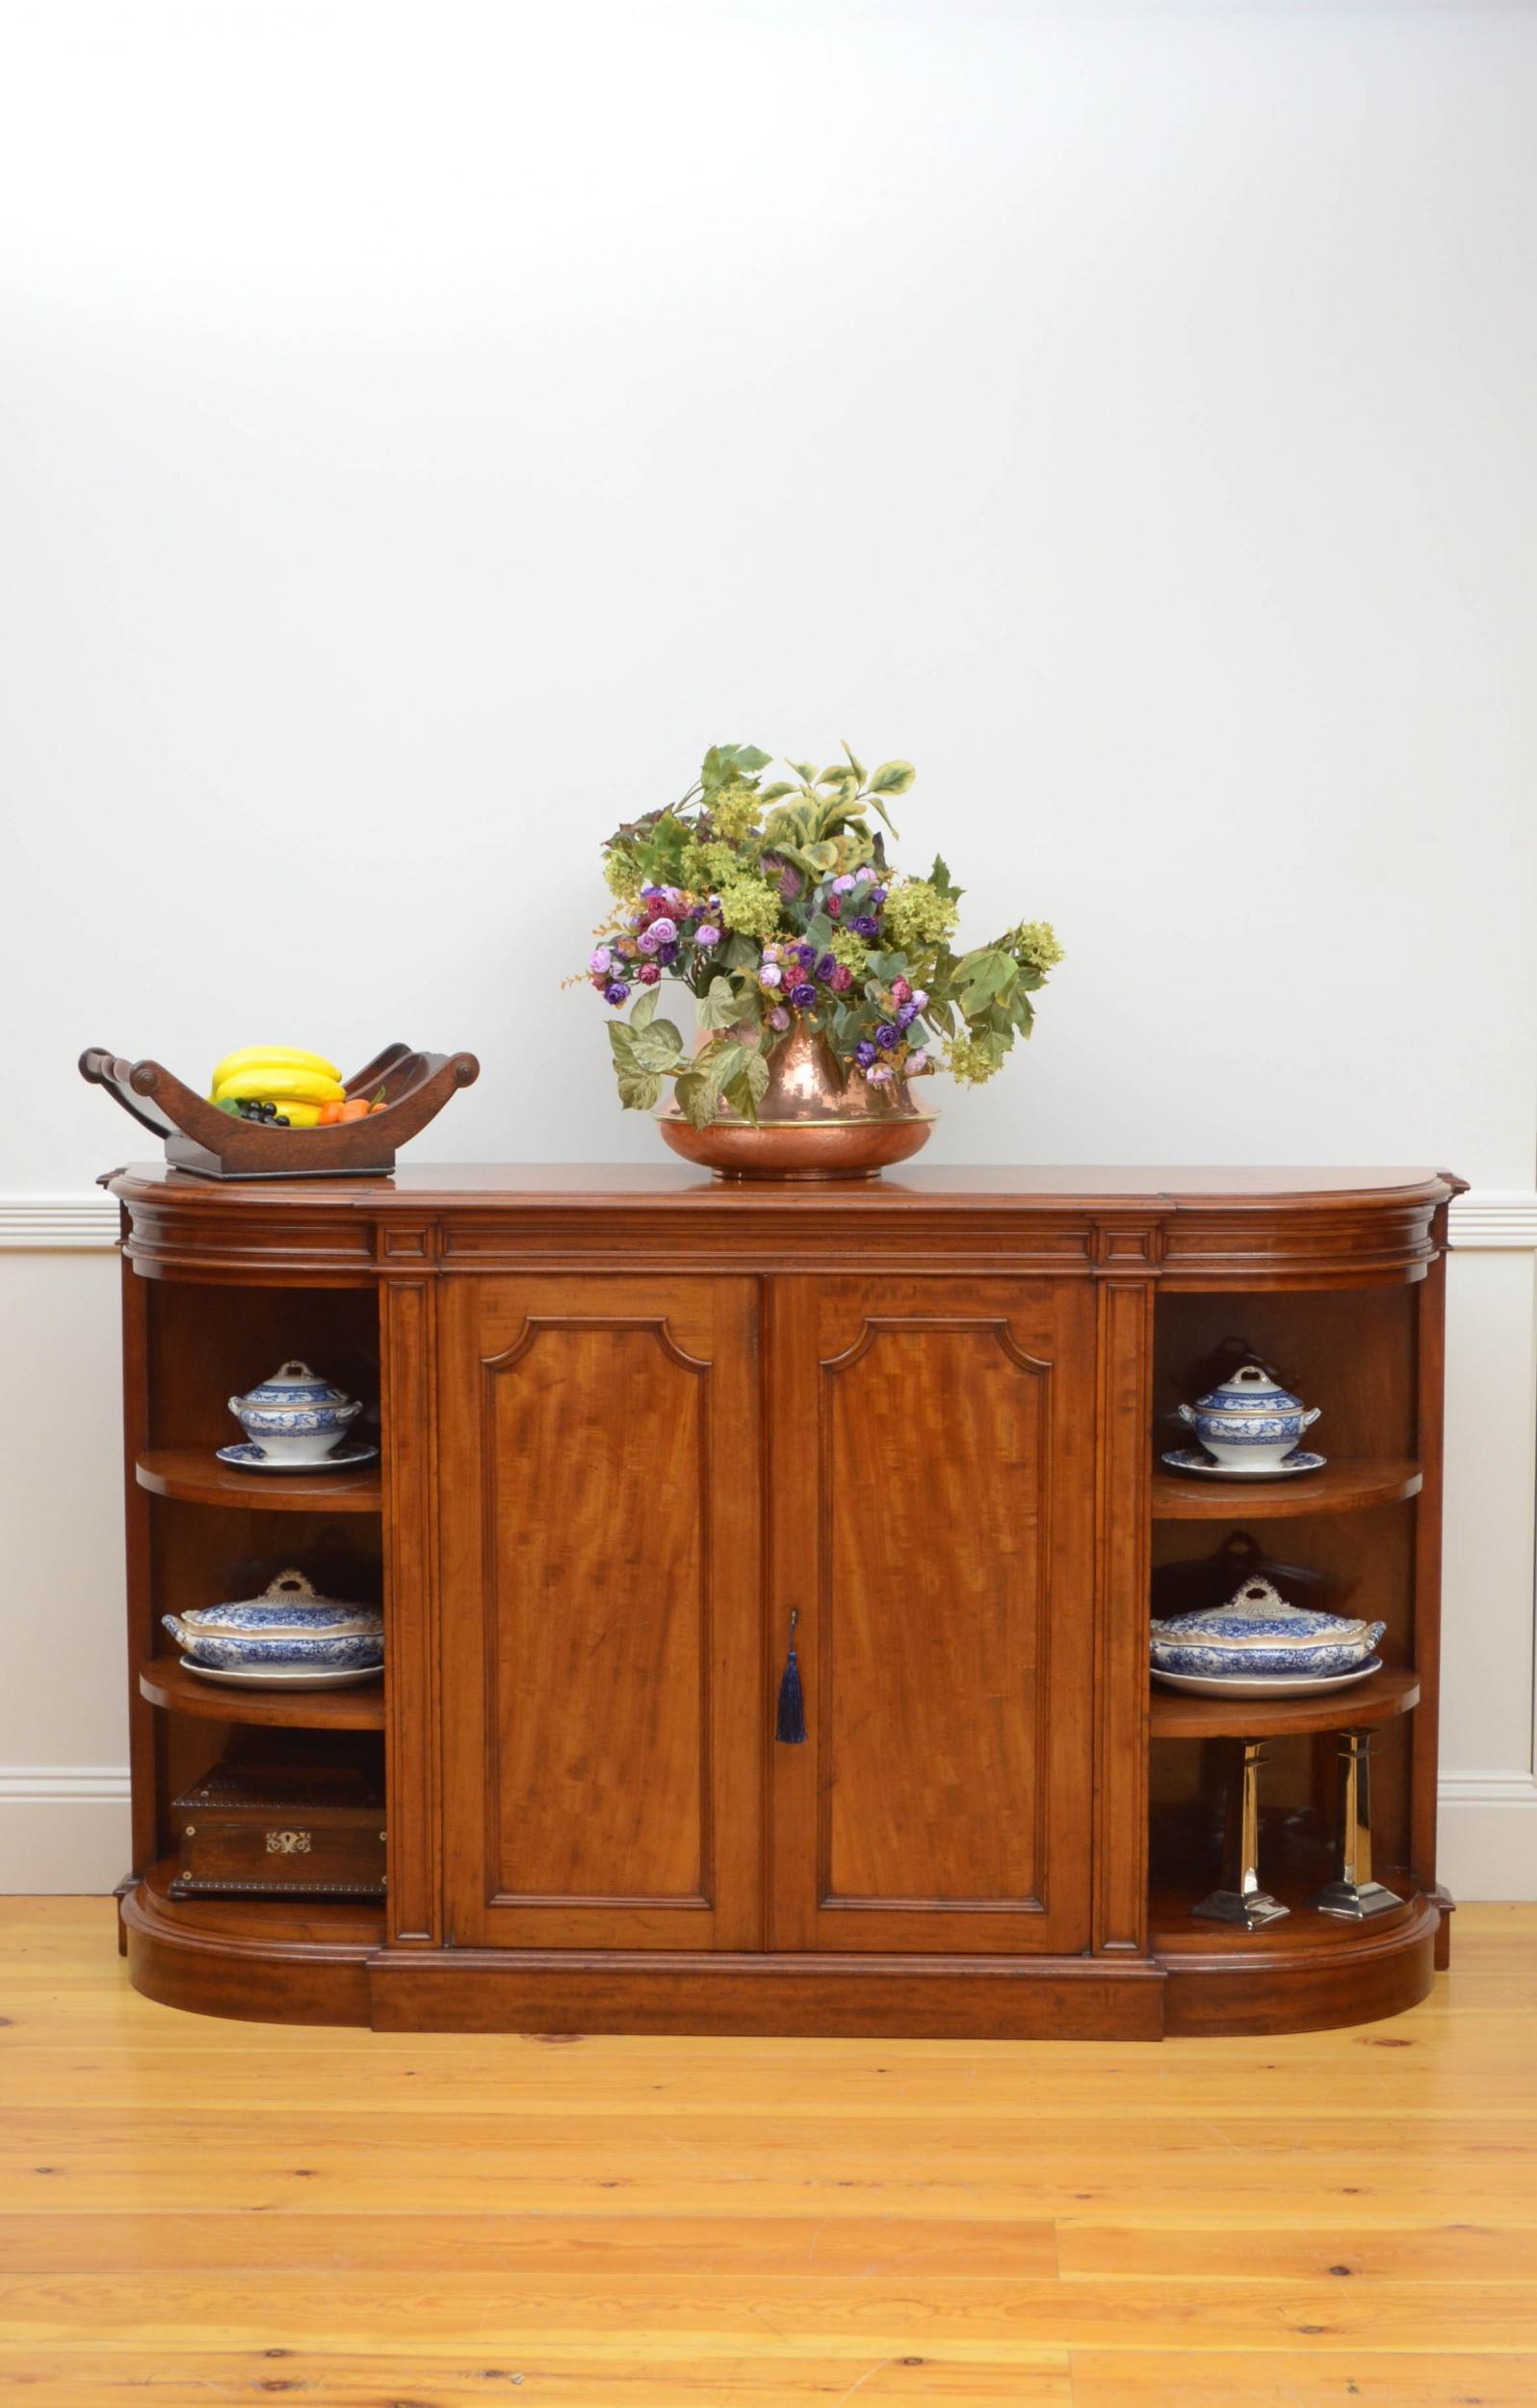 Sn4961, superb quality Victorian Howard and Sons mahogany sideboard, having figured mahogany top above shallow, paneled frieze and a pair of figured mahogany paneled doors, fitted with original working lock and a key and enclosing height adjustable